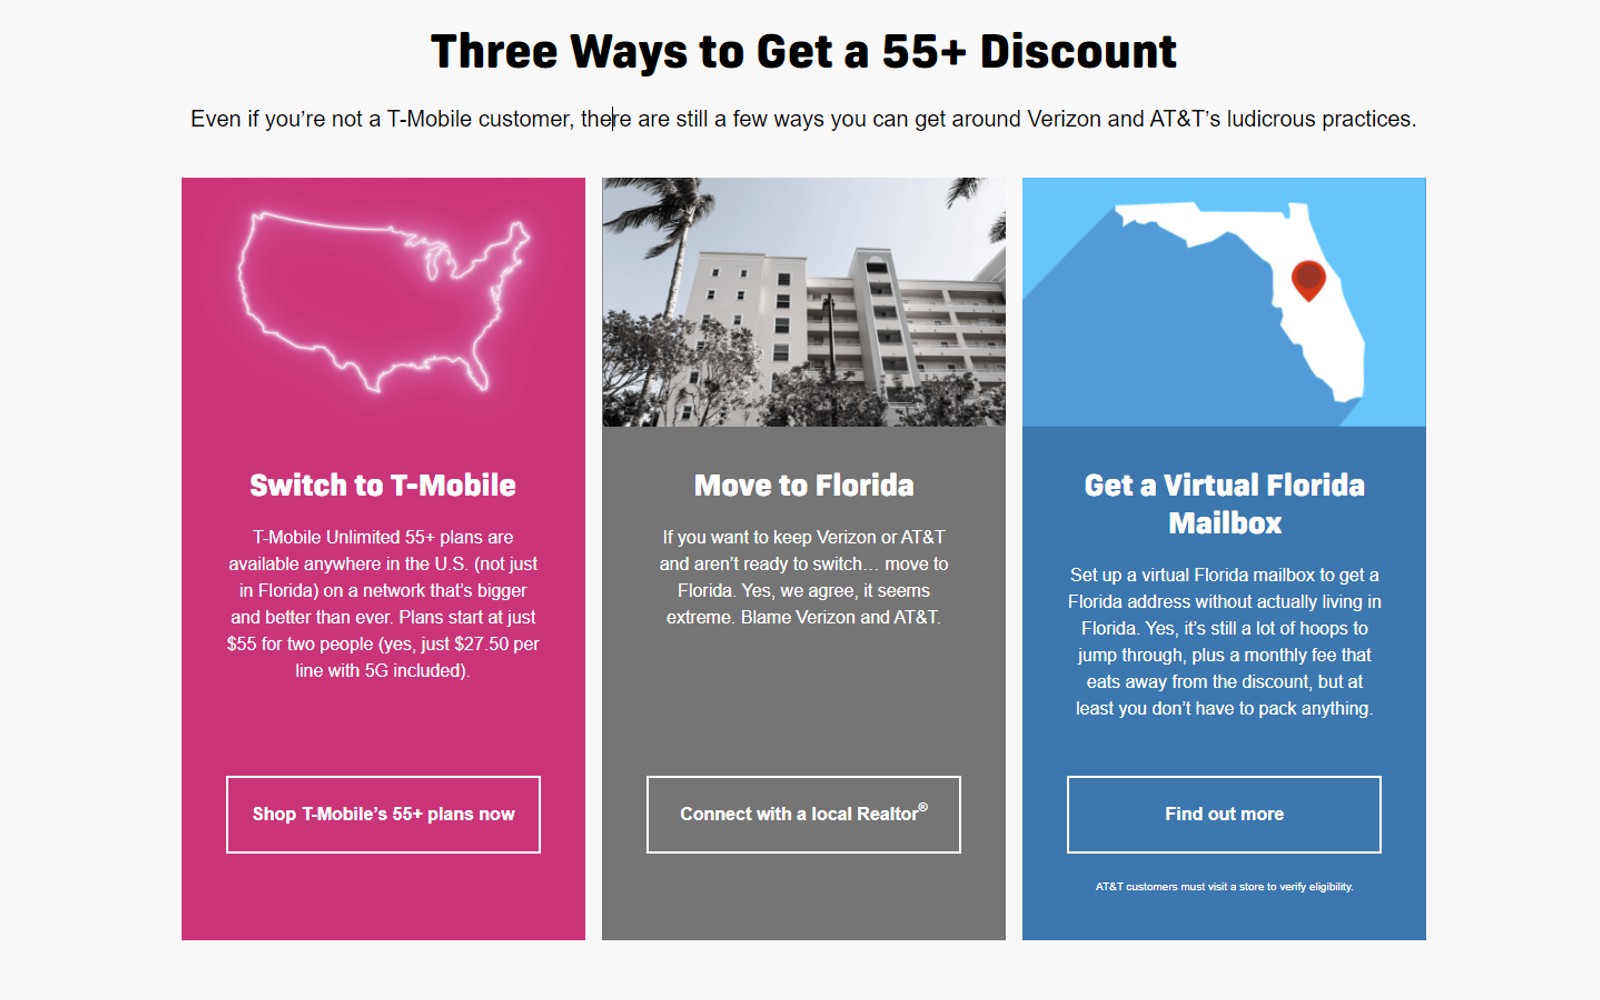 AT&T sues T-Mobile over 'dishonest and completely false' senior discount ad campaign